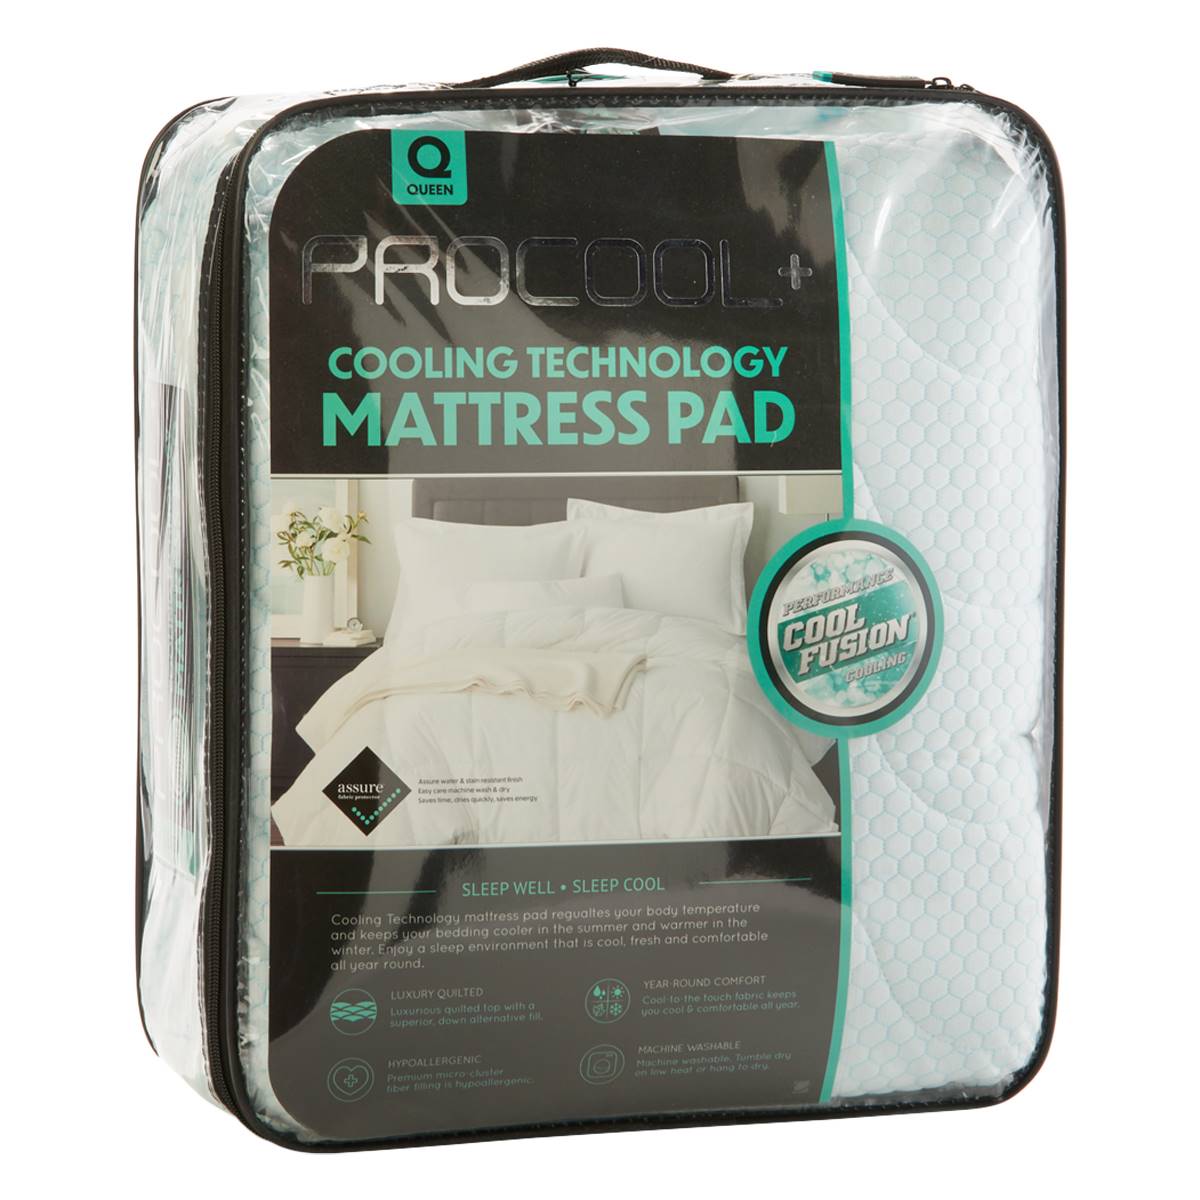 PROCOOL Quilted Cooling Mattress Pad